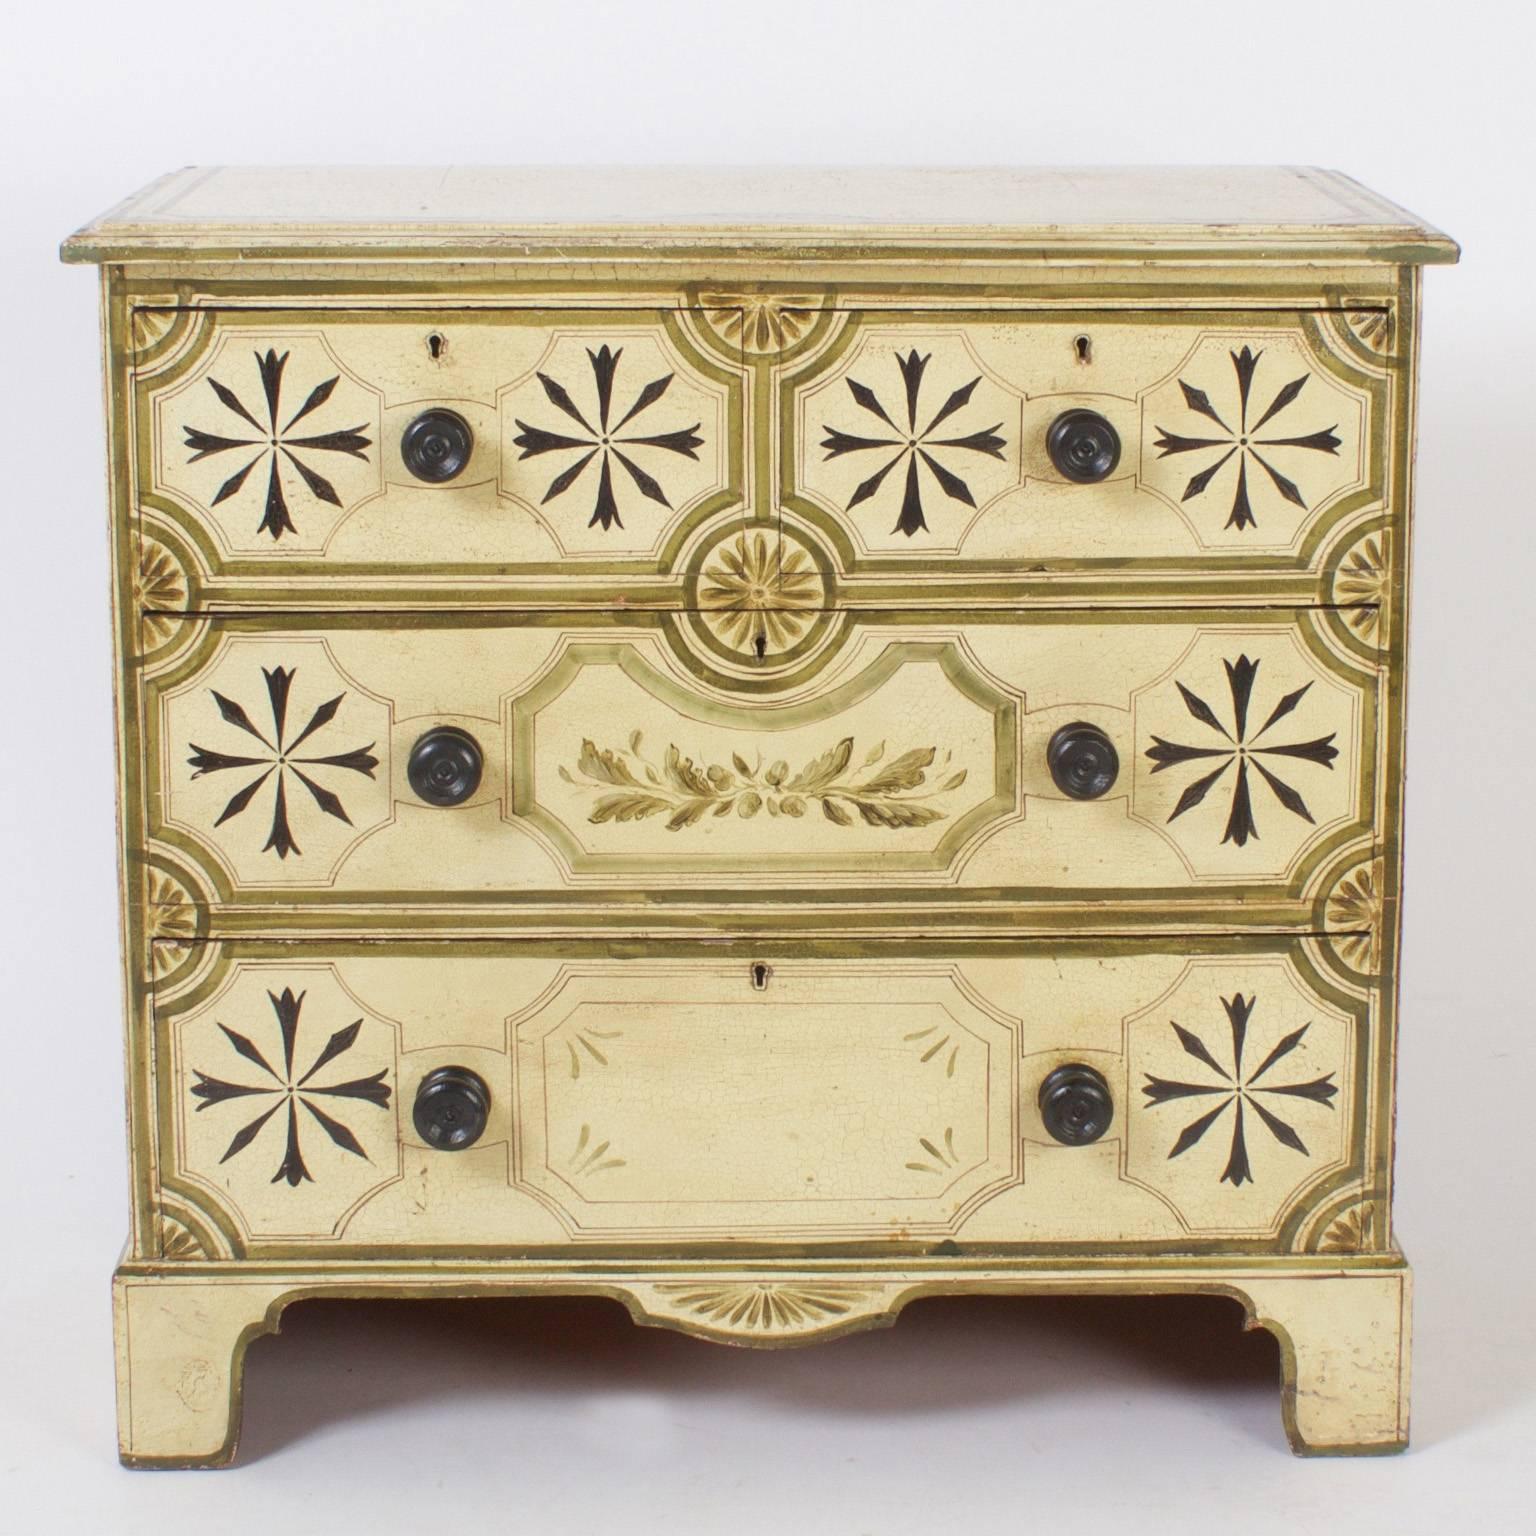 Charming, vintage cottage chest of drawers painted with a crackled ivory background and decorated with geometric and floral designs. The case is a simple Georgian form on dramatic bracket base.